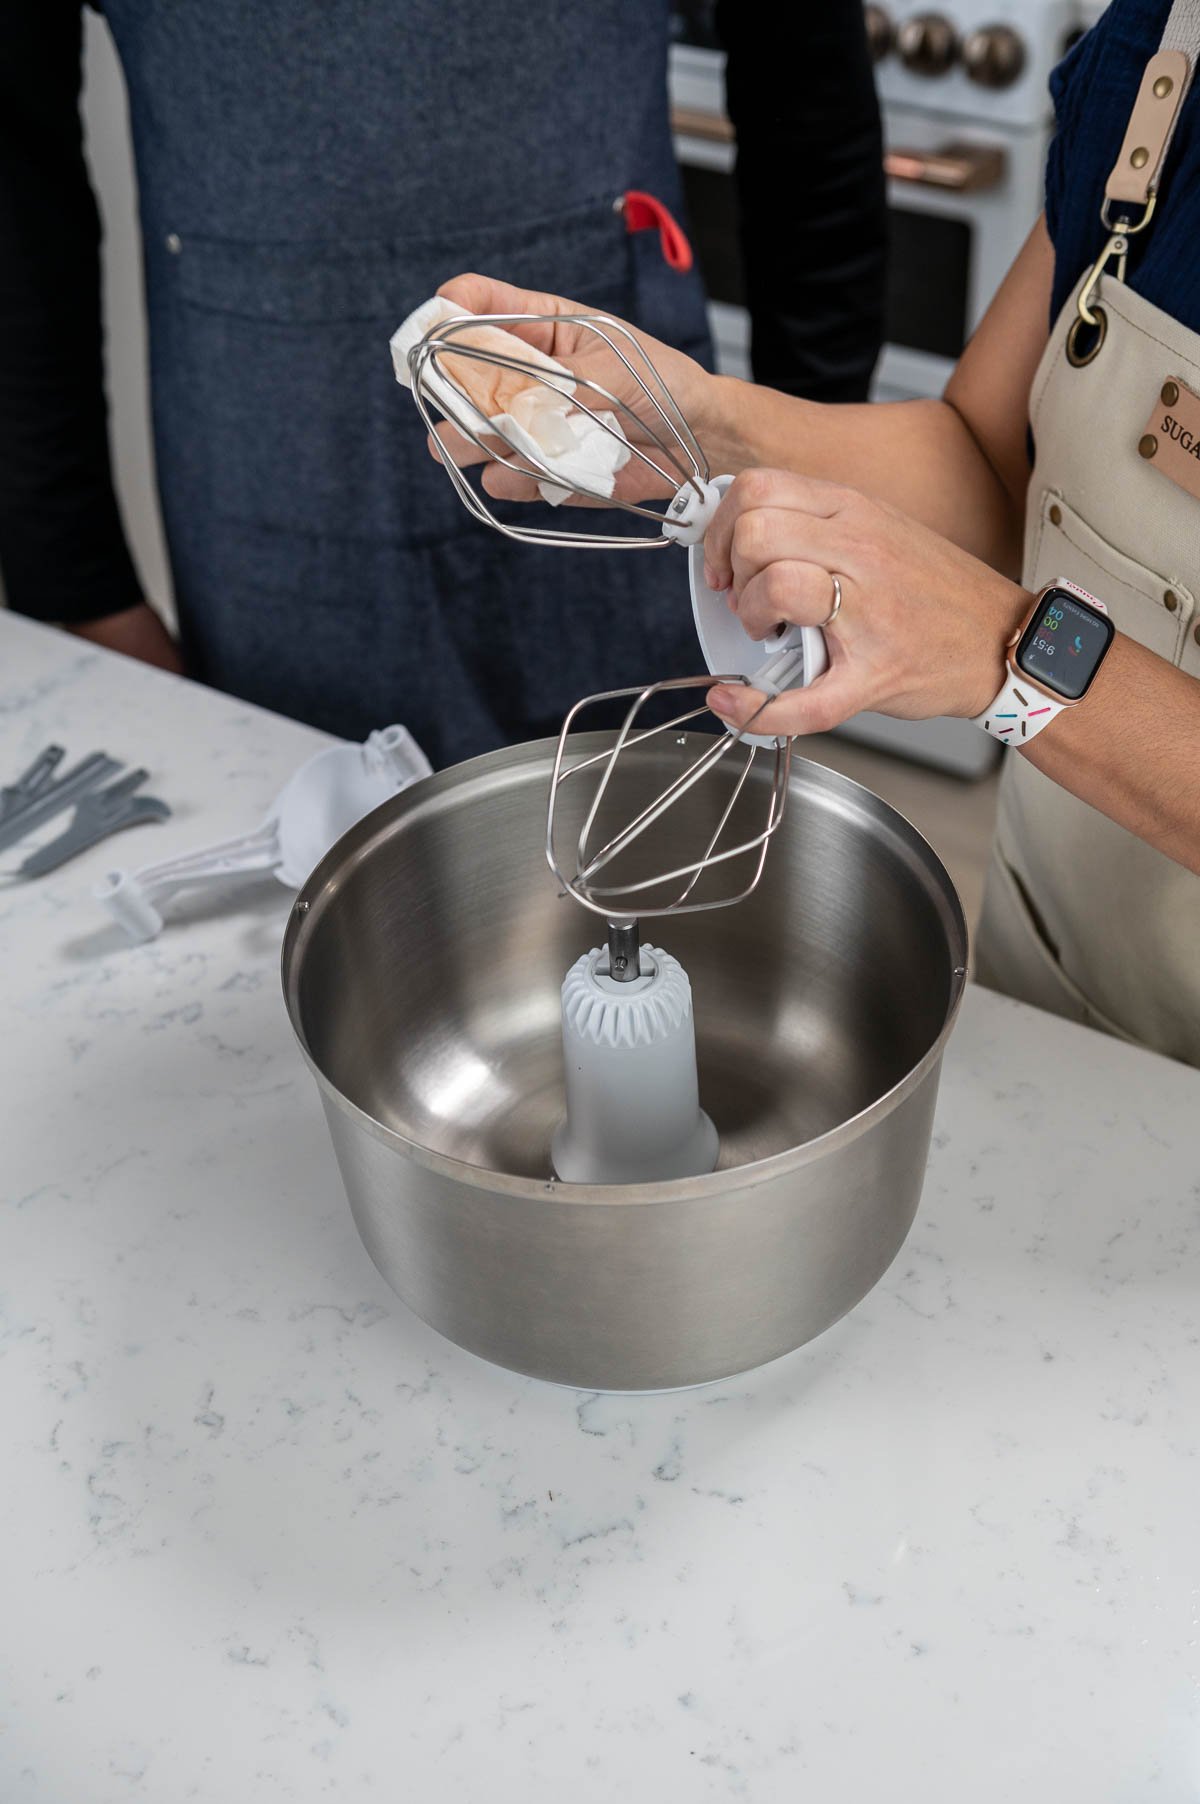 hands holding whisk attachments